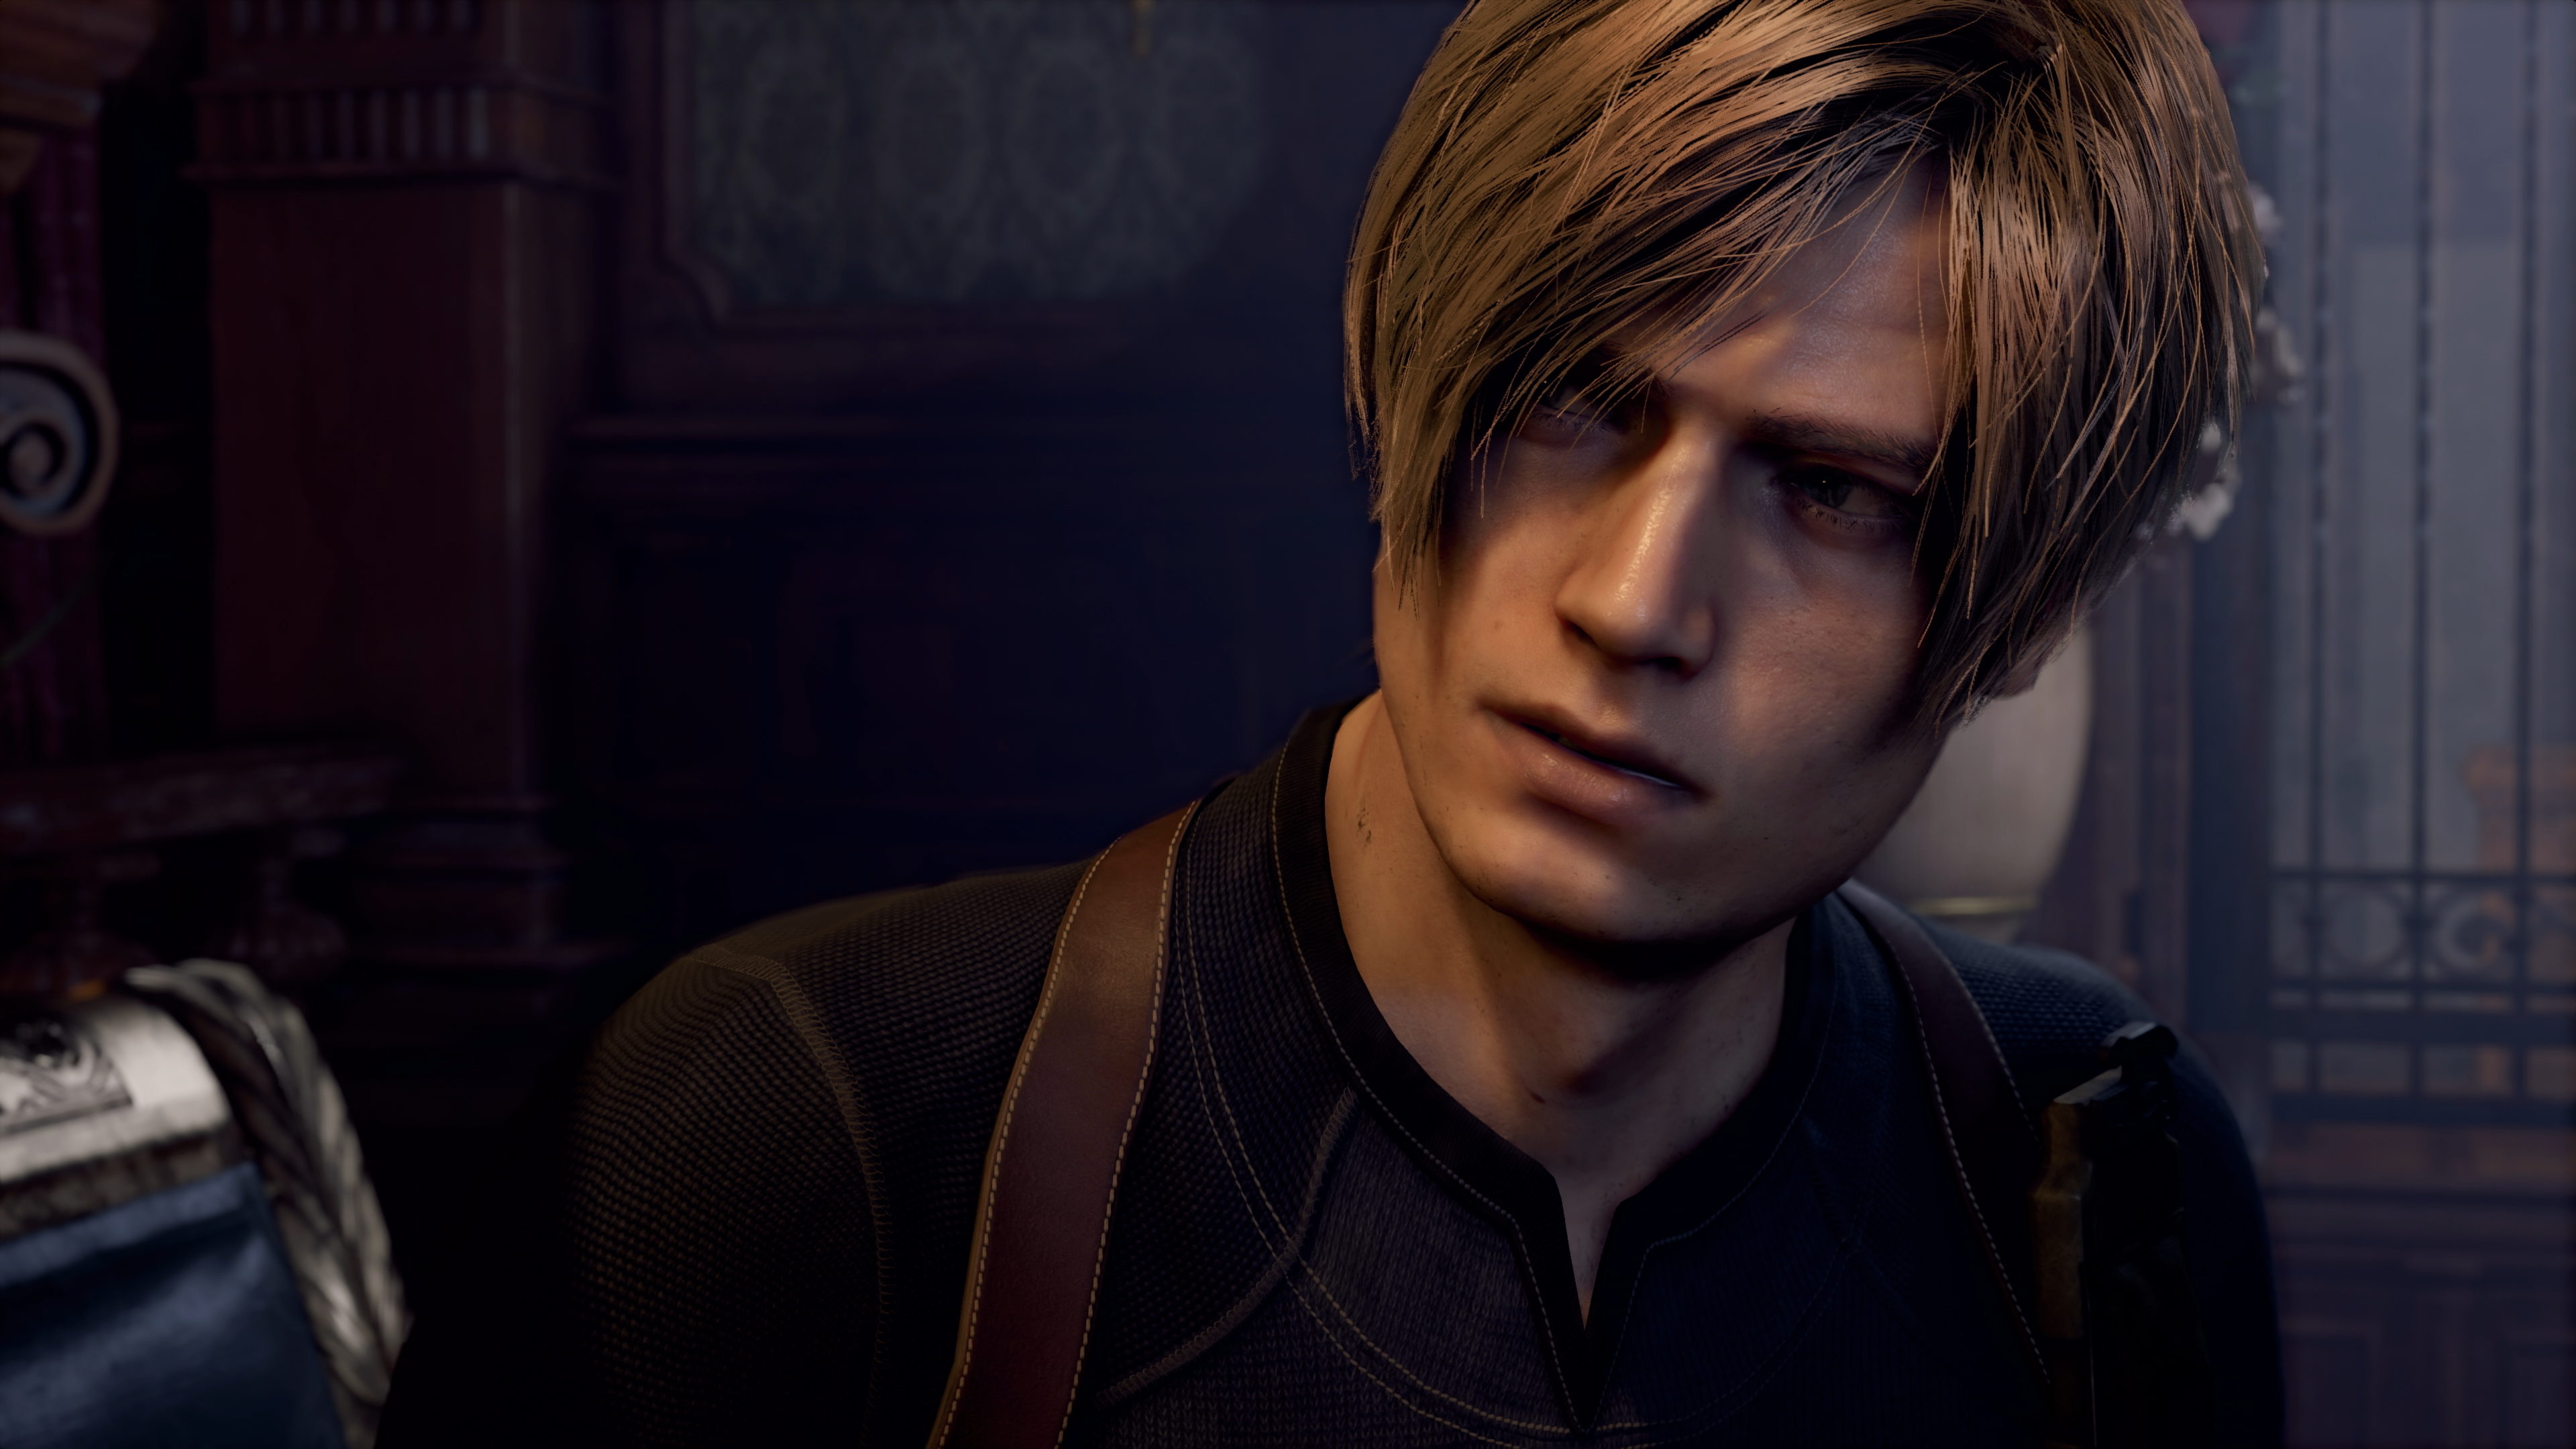 Resident Evil 4 Remake - All Settings, Controls, & Accessibility